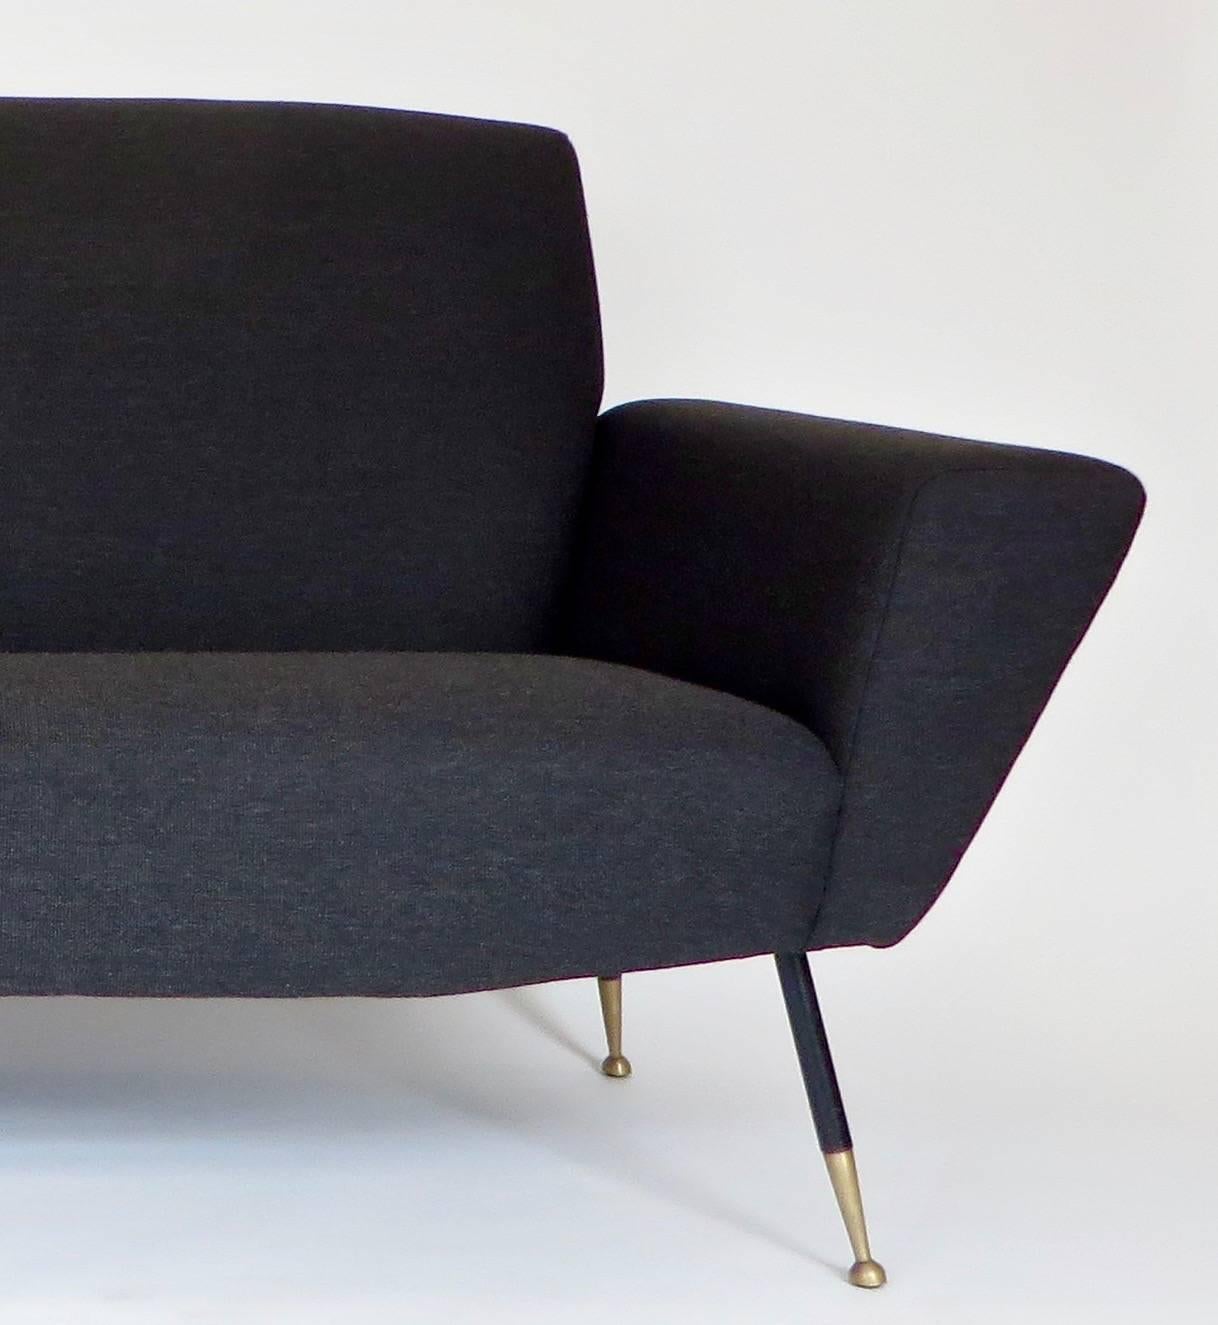 Upholstery Italian Midcentury circa 1950s Settee with Iconic Black and Brass Legs